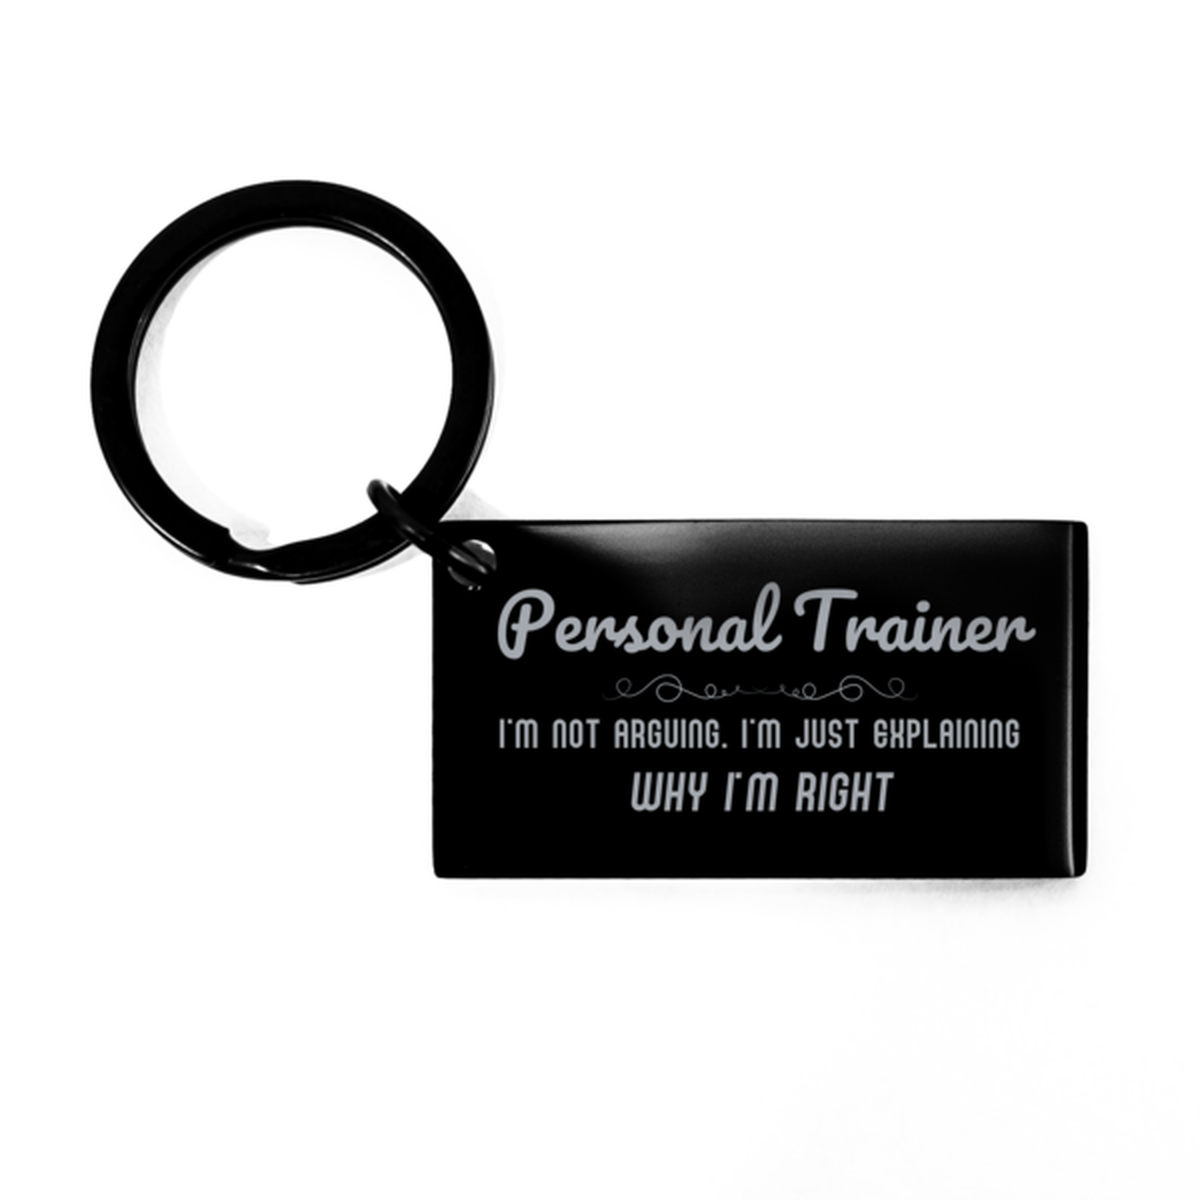 Personal Trainer I'm not Arguing. I'm Just Explaining Why I'm RIGHT Keychain, Funny Saying Quote Personal Trainer Gifts For Personal Trainer Graduation Birthday Christmas Gifts for Men Women Coworker